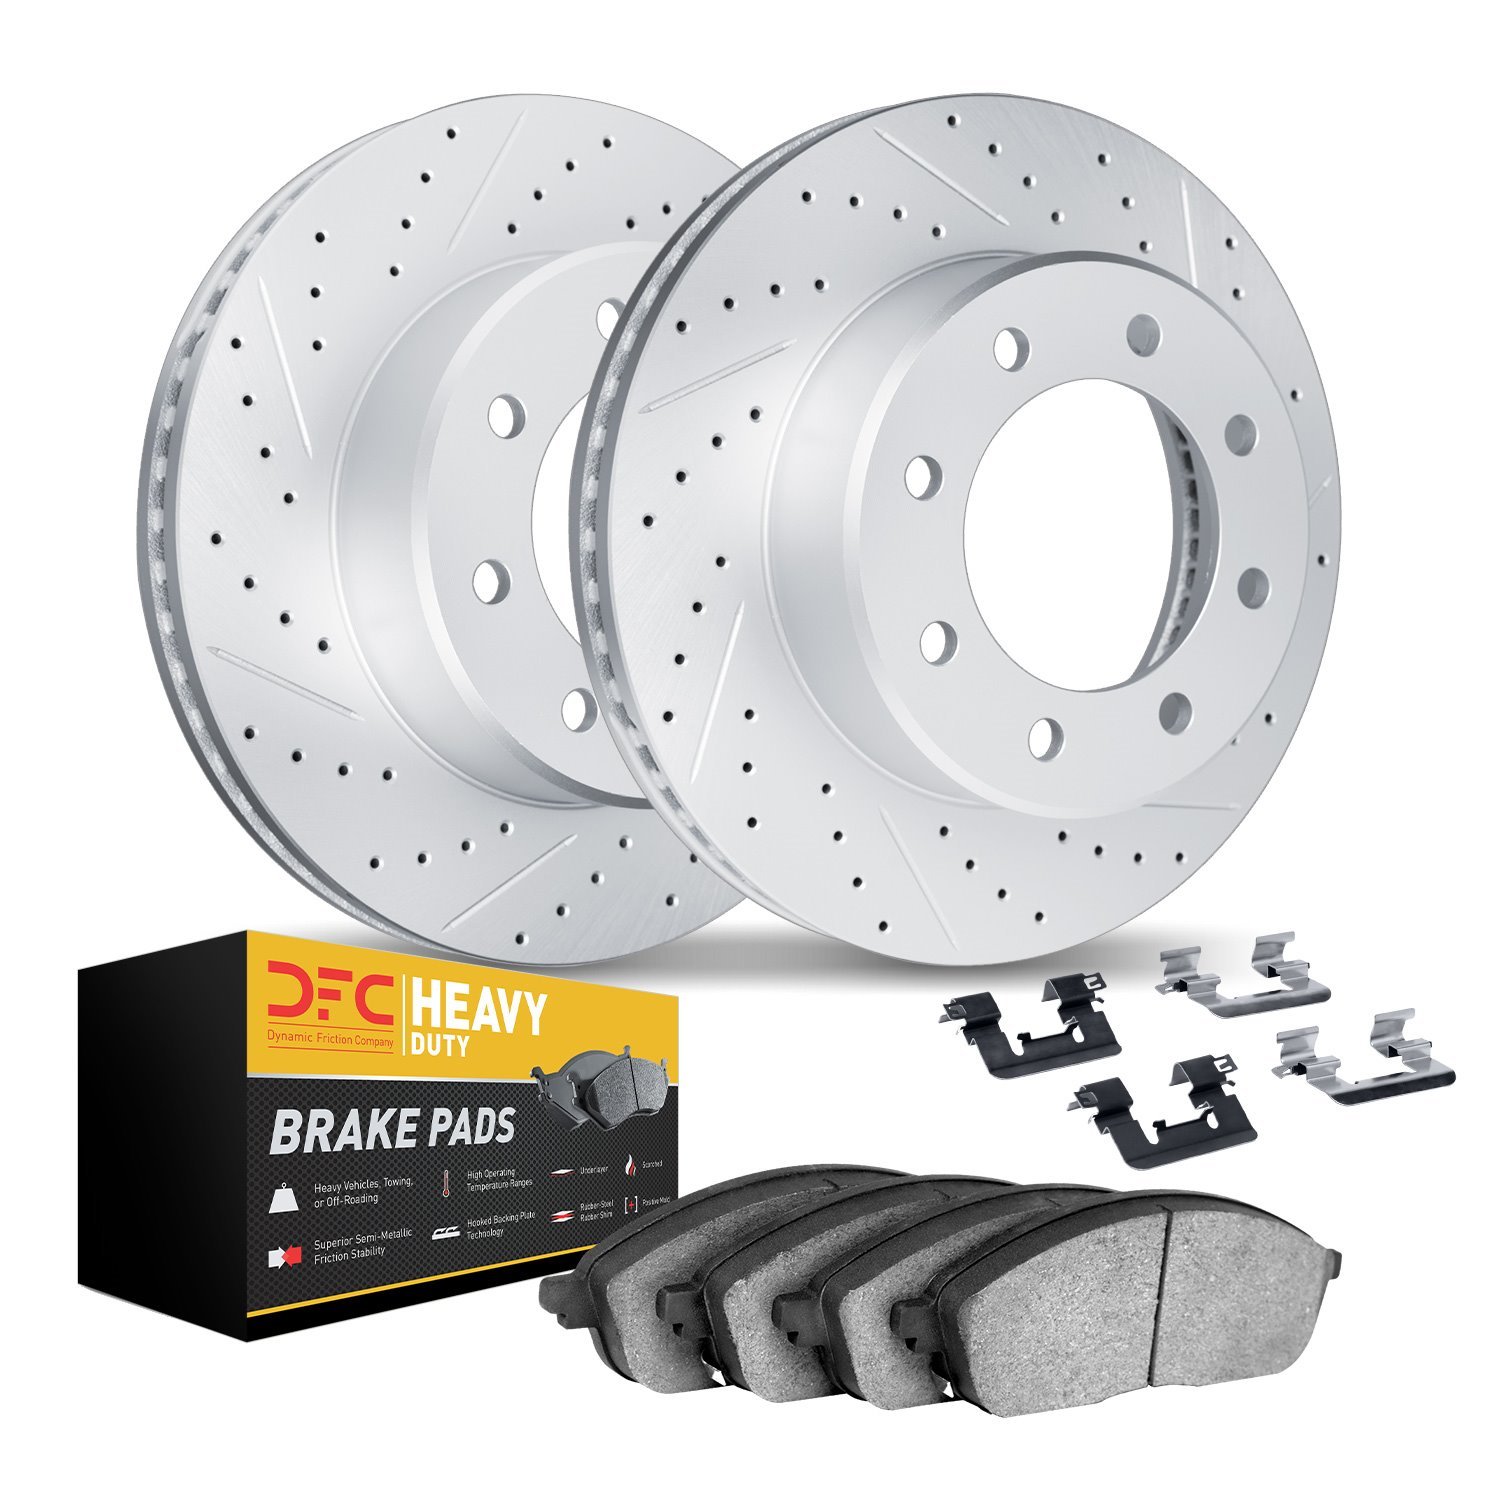 2212-48036 Geoperformance Drilled/Slotted Rotors w/Heavy-Duty Pads Kit & Hardware, 2001-2010 GM, Position: Rear